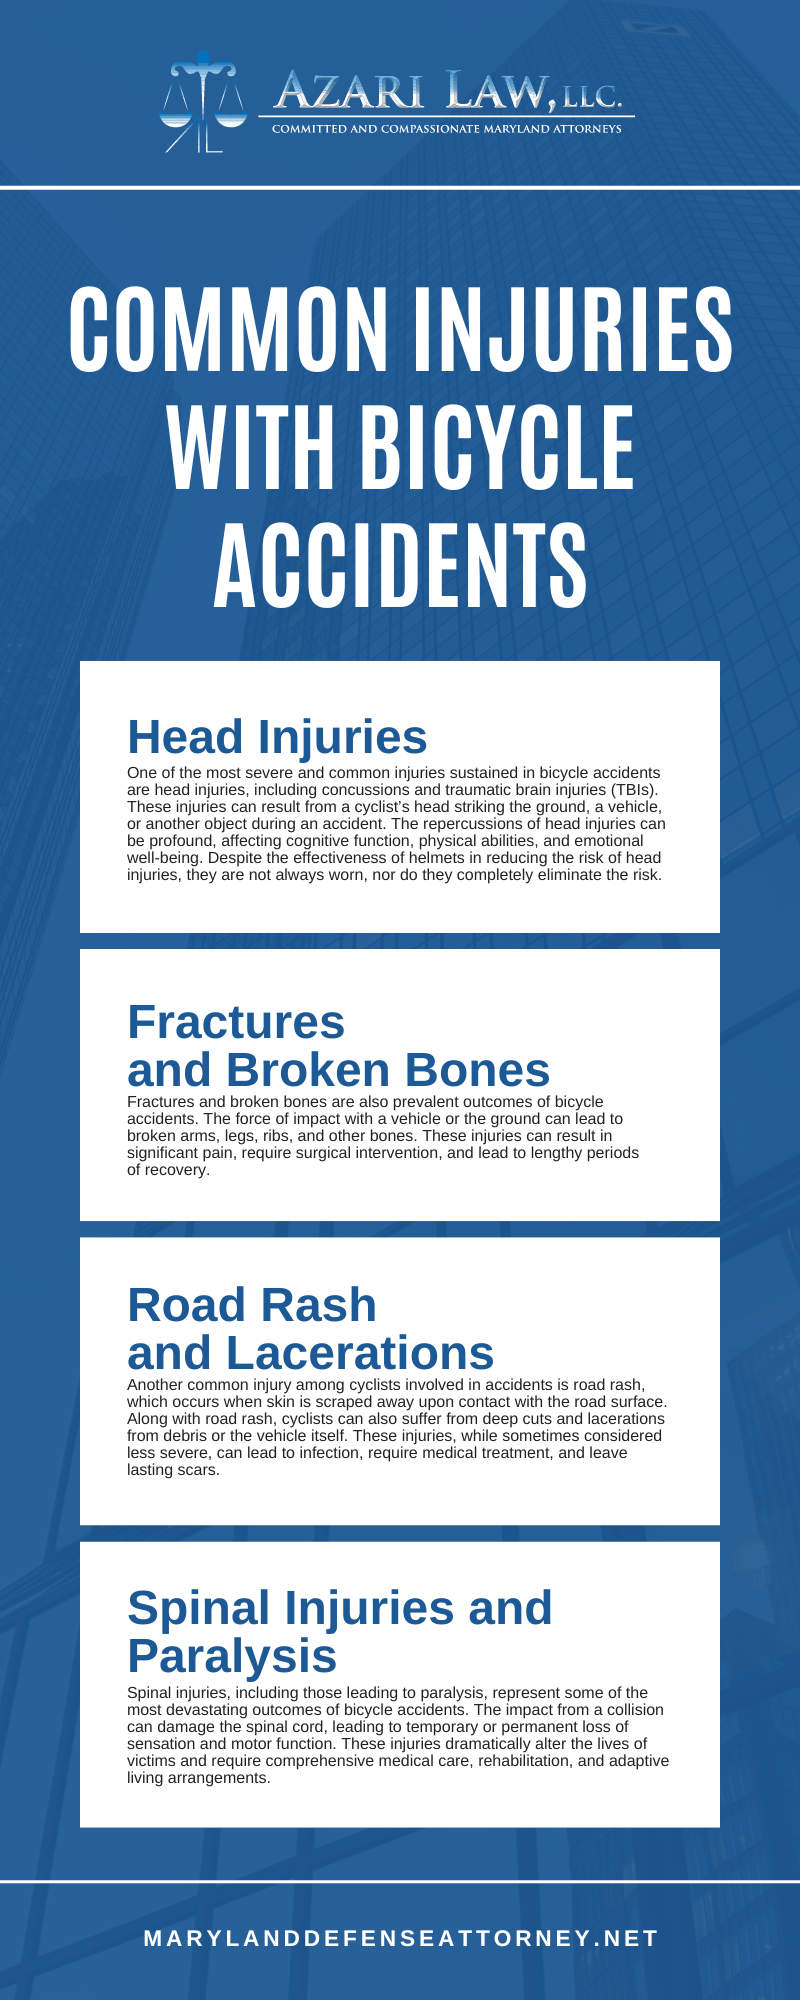 Common Injuries With Bicycle Accidents Infographic